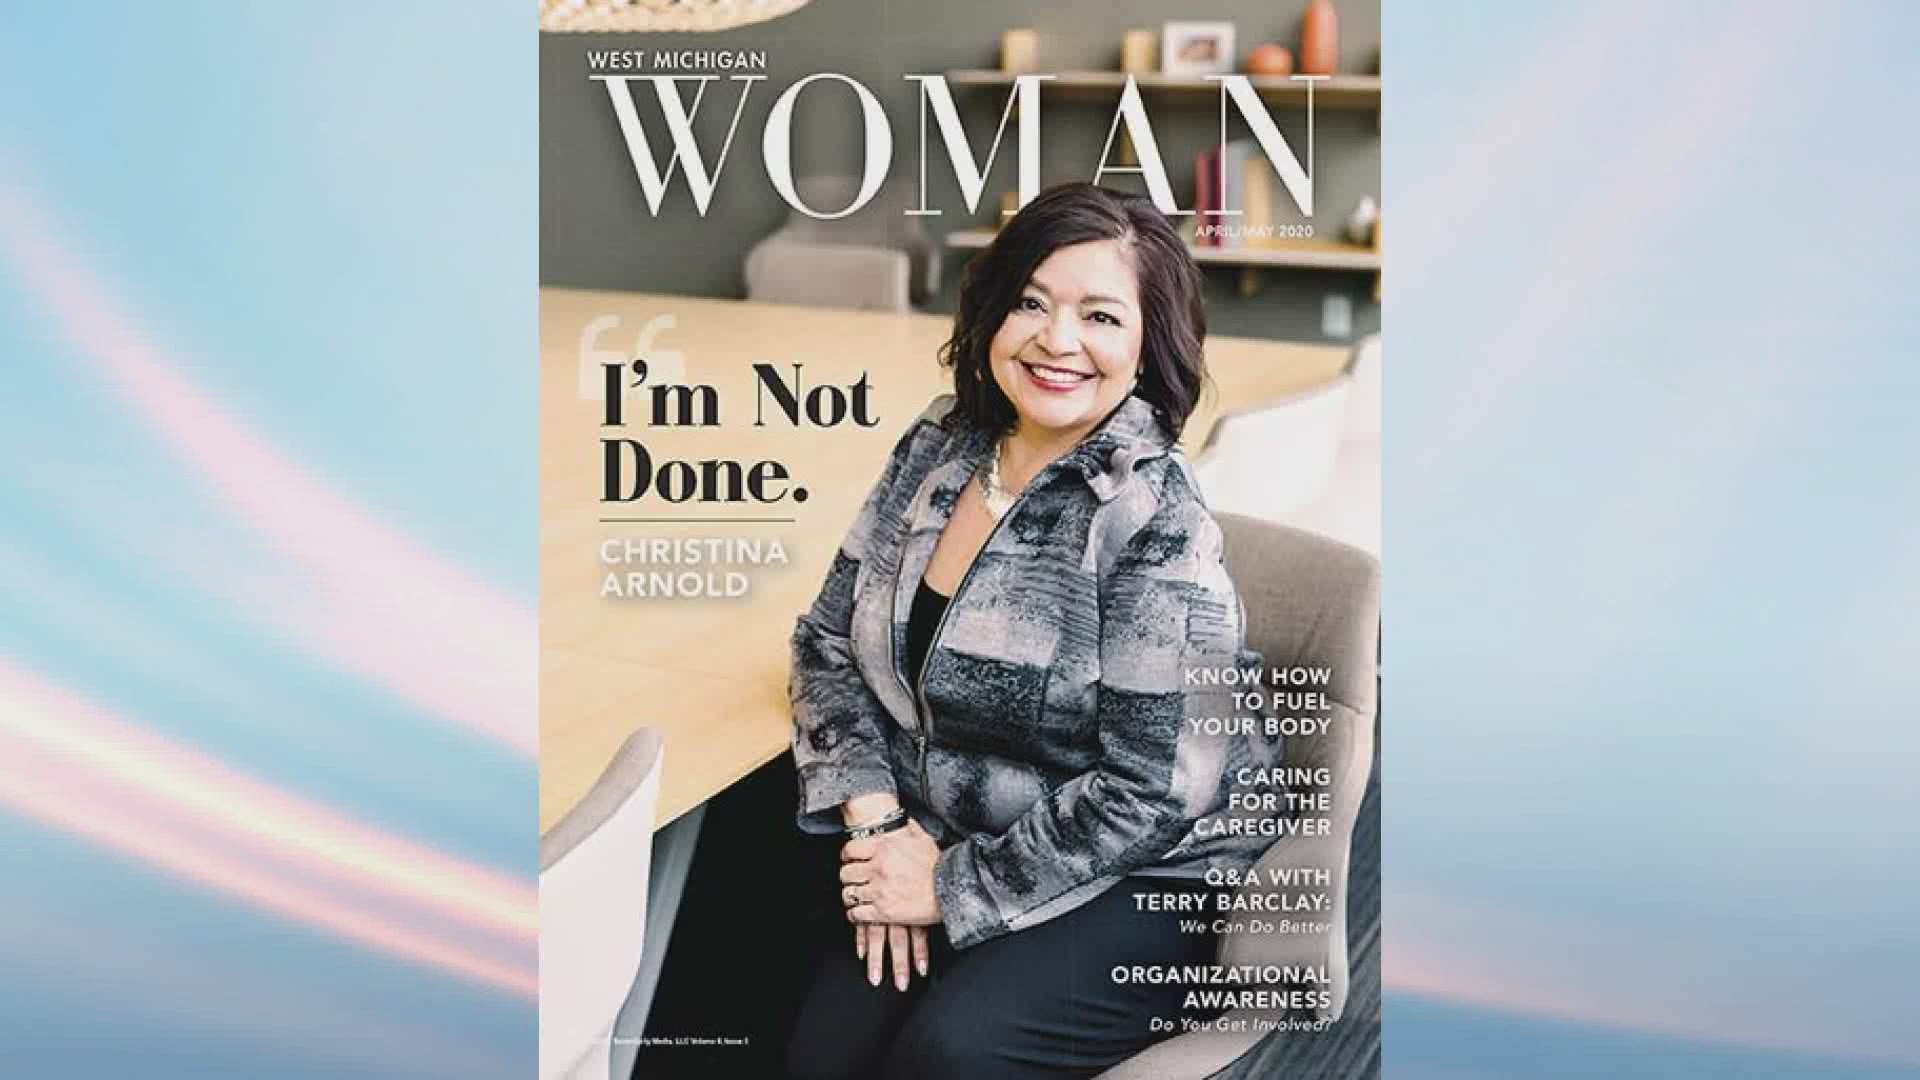 West Michigan Woman Magazine pays tribute to women in health care during the COVID 19 crisis